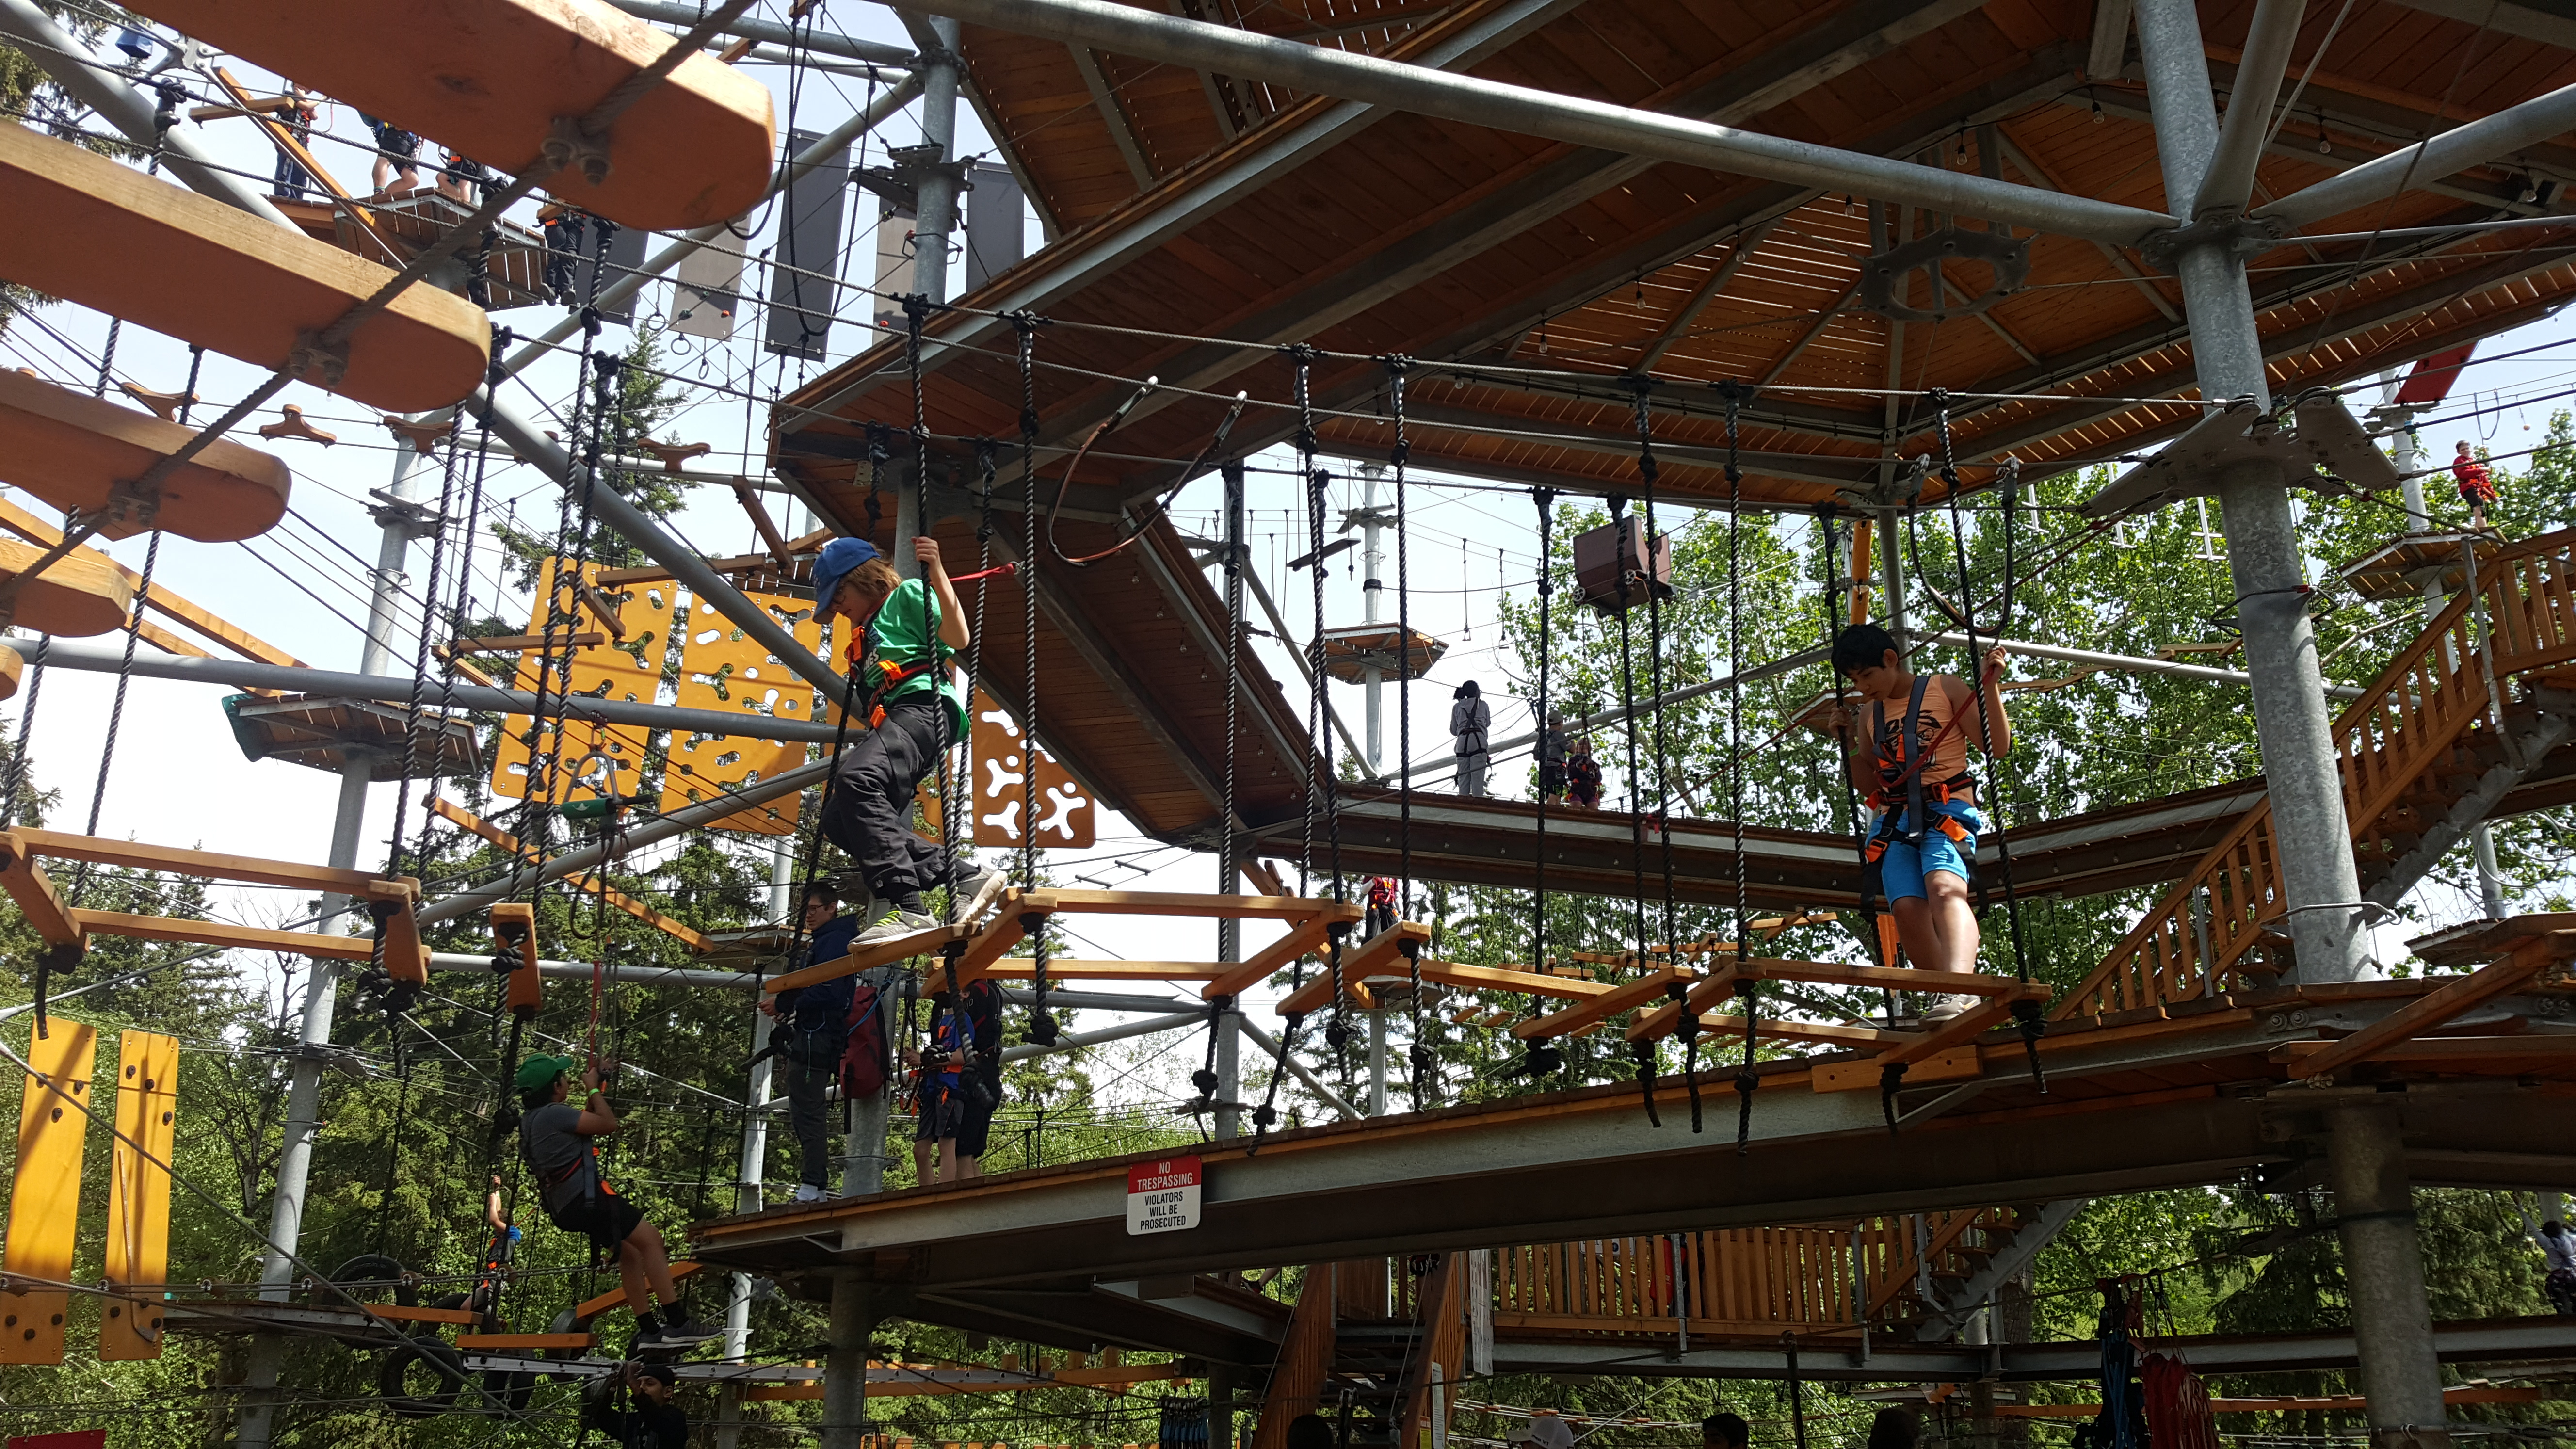 Our Student go on field trips throughout the year to enhance their learning experiences. Last year the grade 6 class got to go to the Aerial Park at Snow Valley.